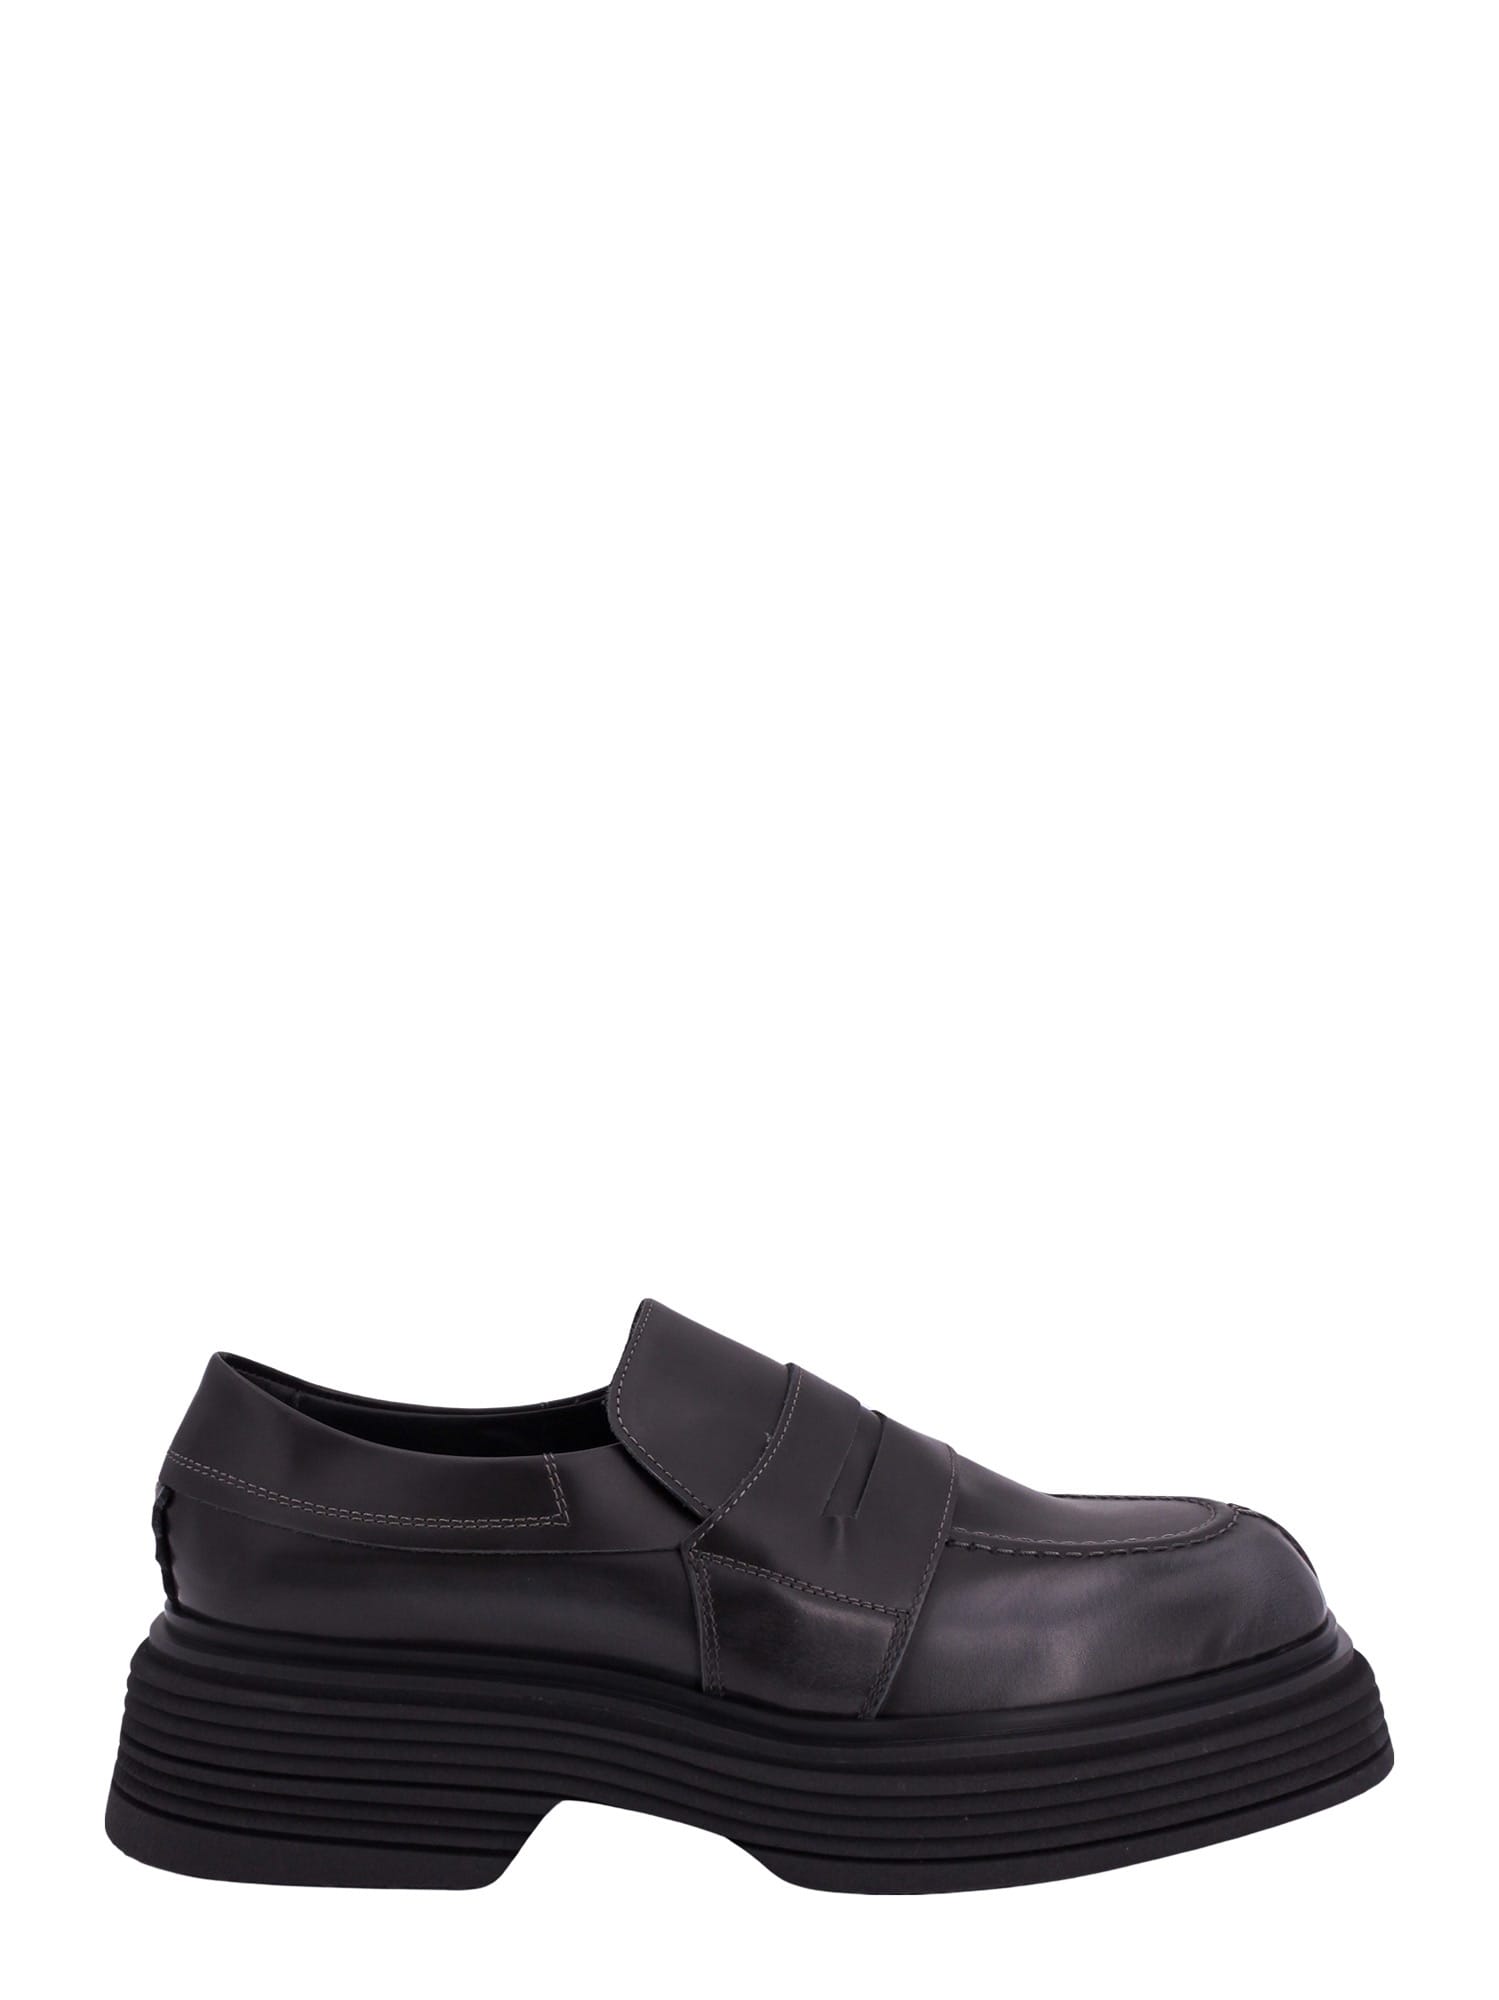 THE ANTIPODE LOAFER